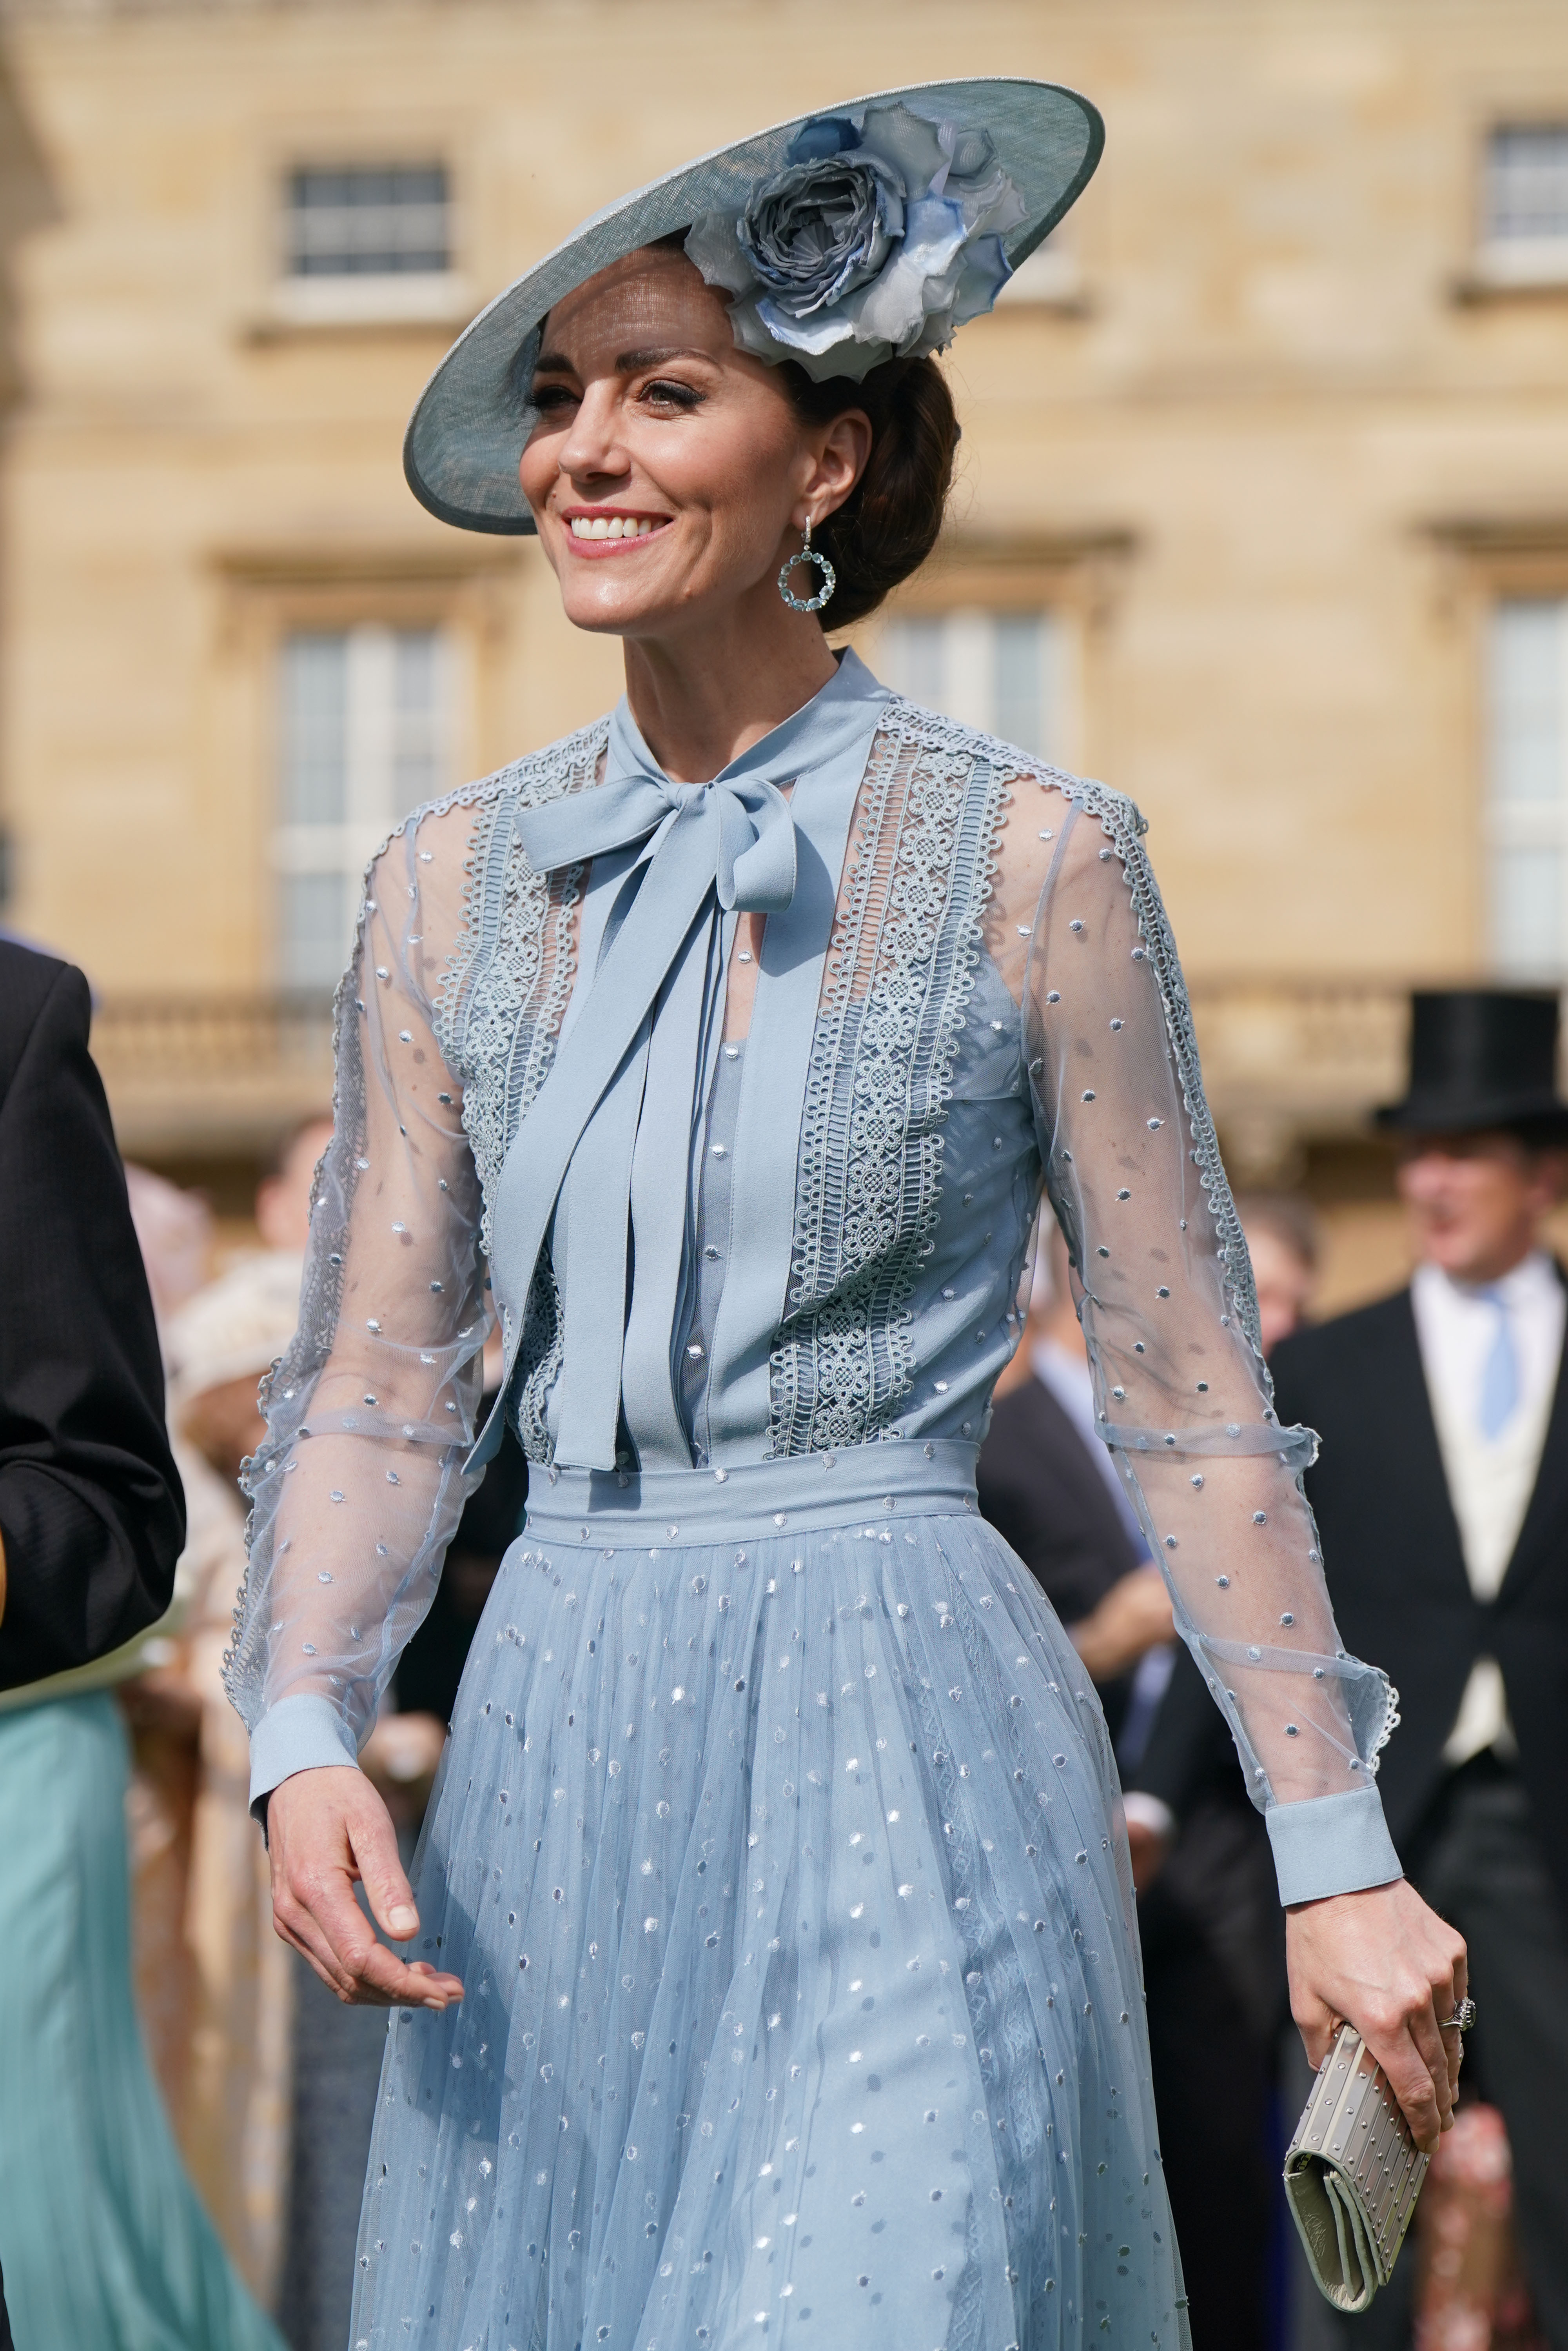 Kate Middleton In Elie Saab For Royal Garden Party: The Full Look